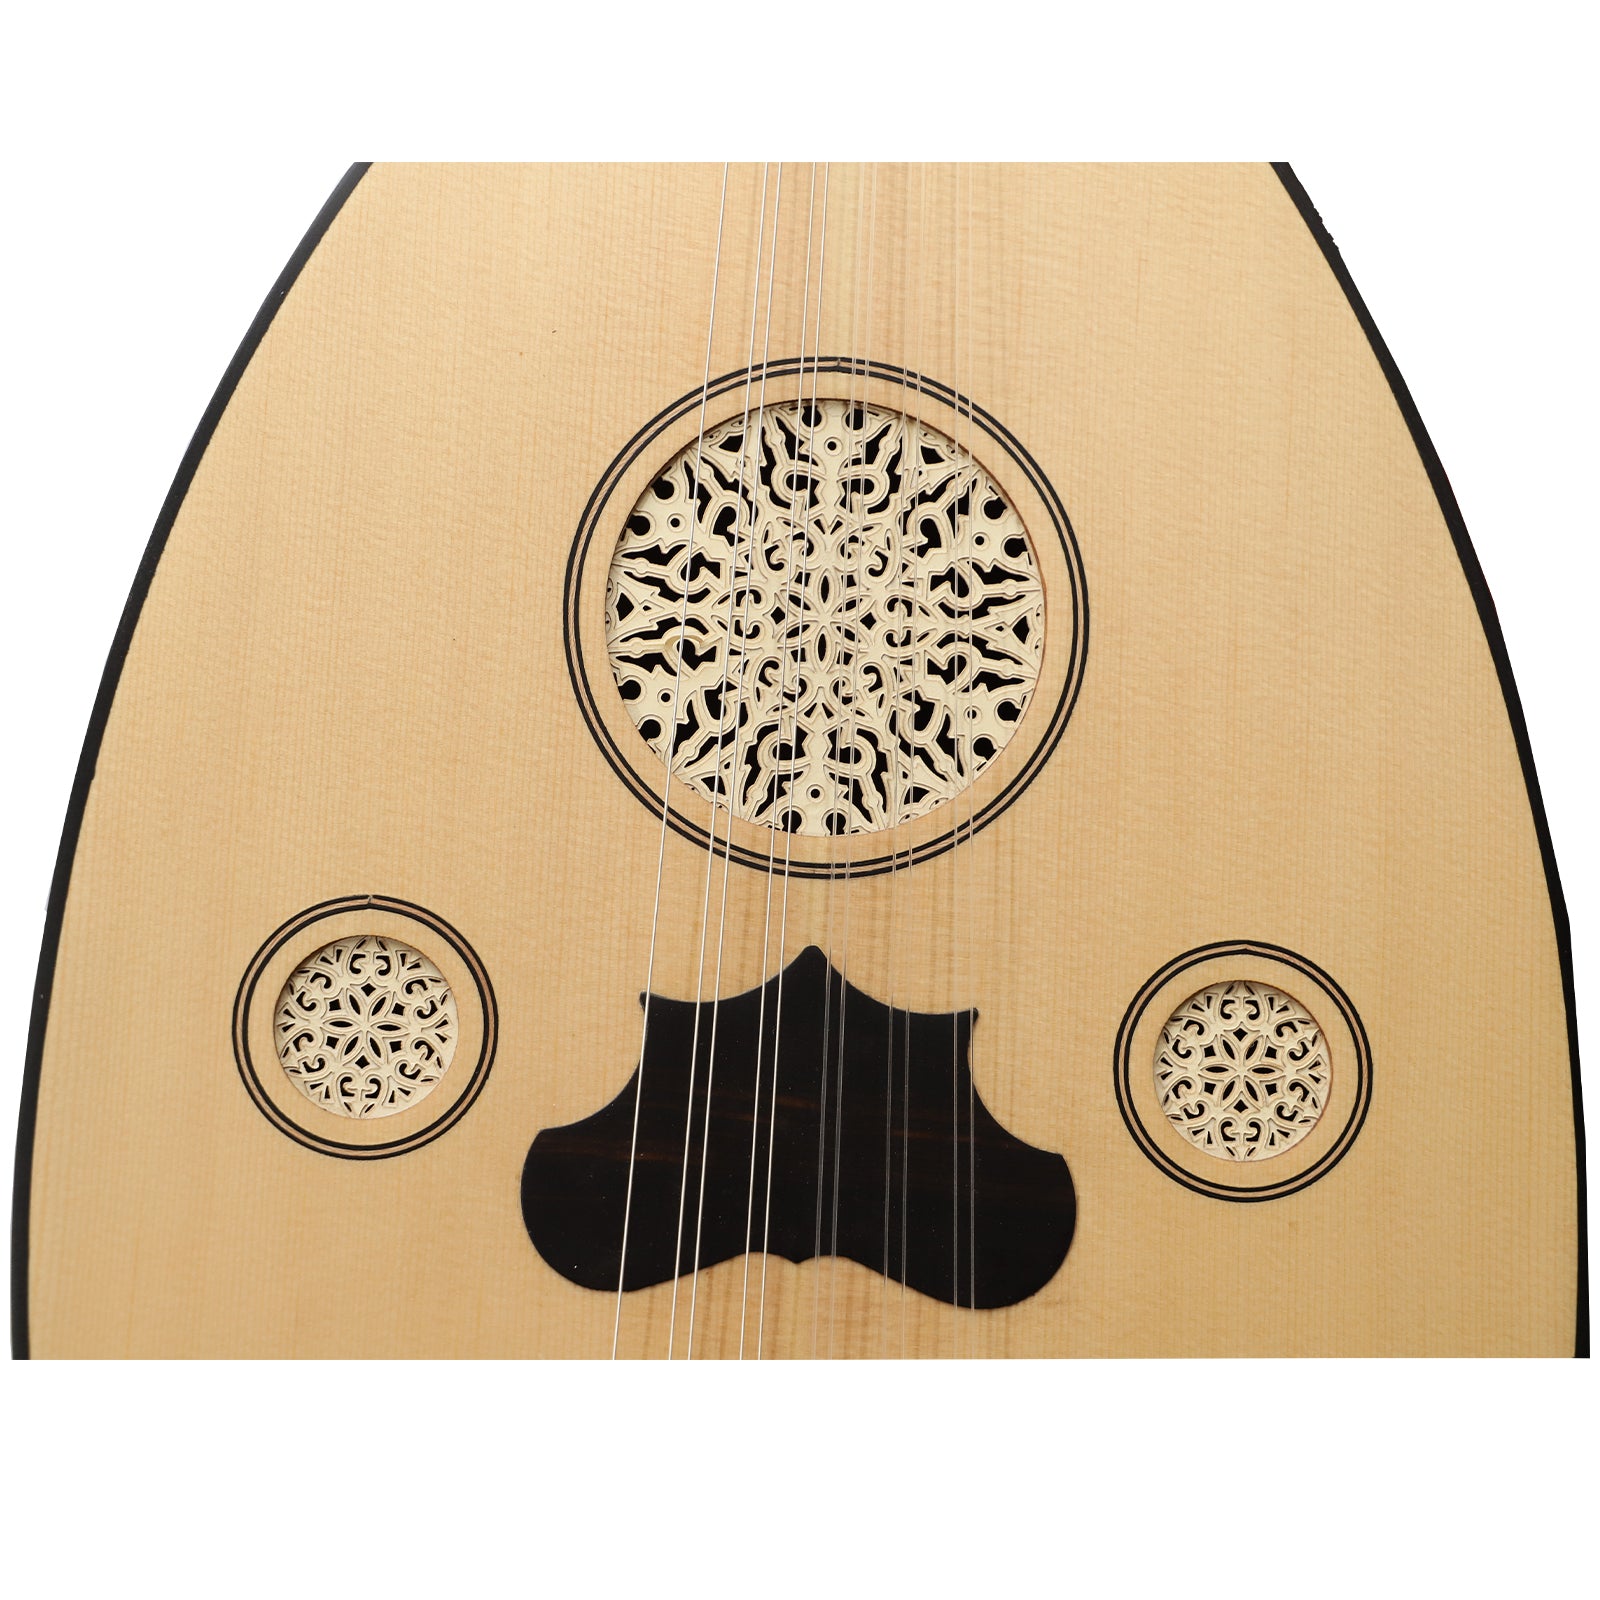 Oud Instrument, OUD String Instrument for Sale Berlin Germany